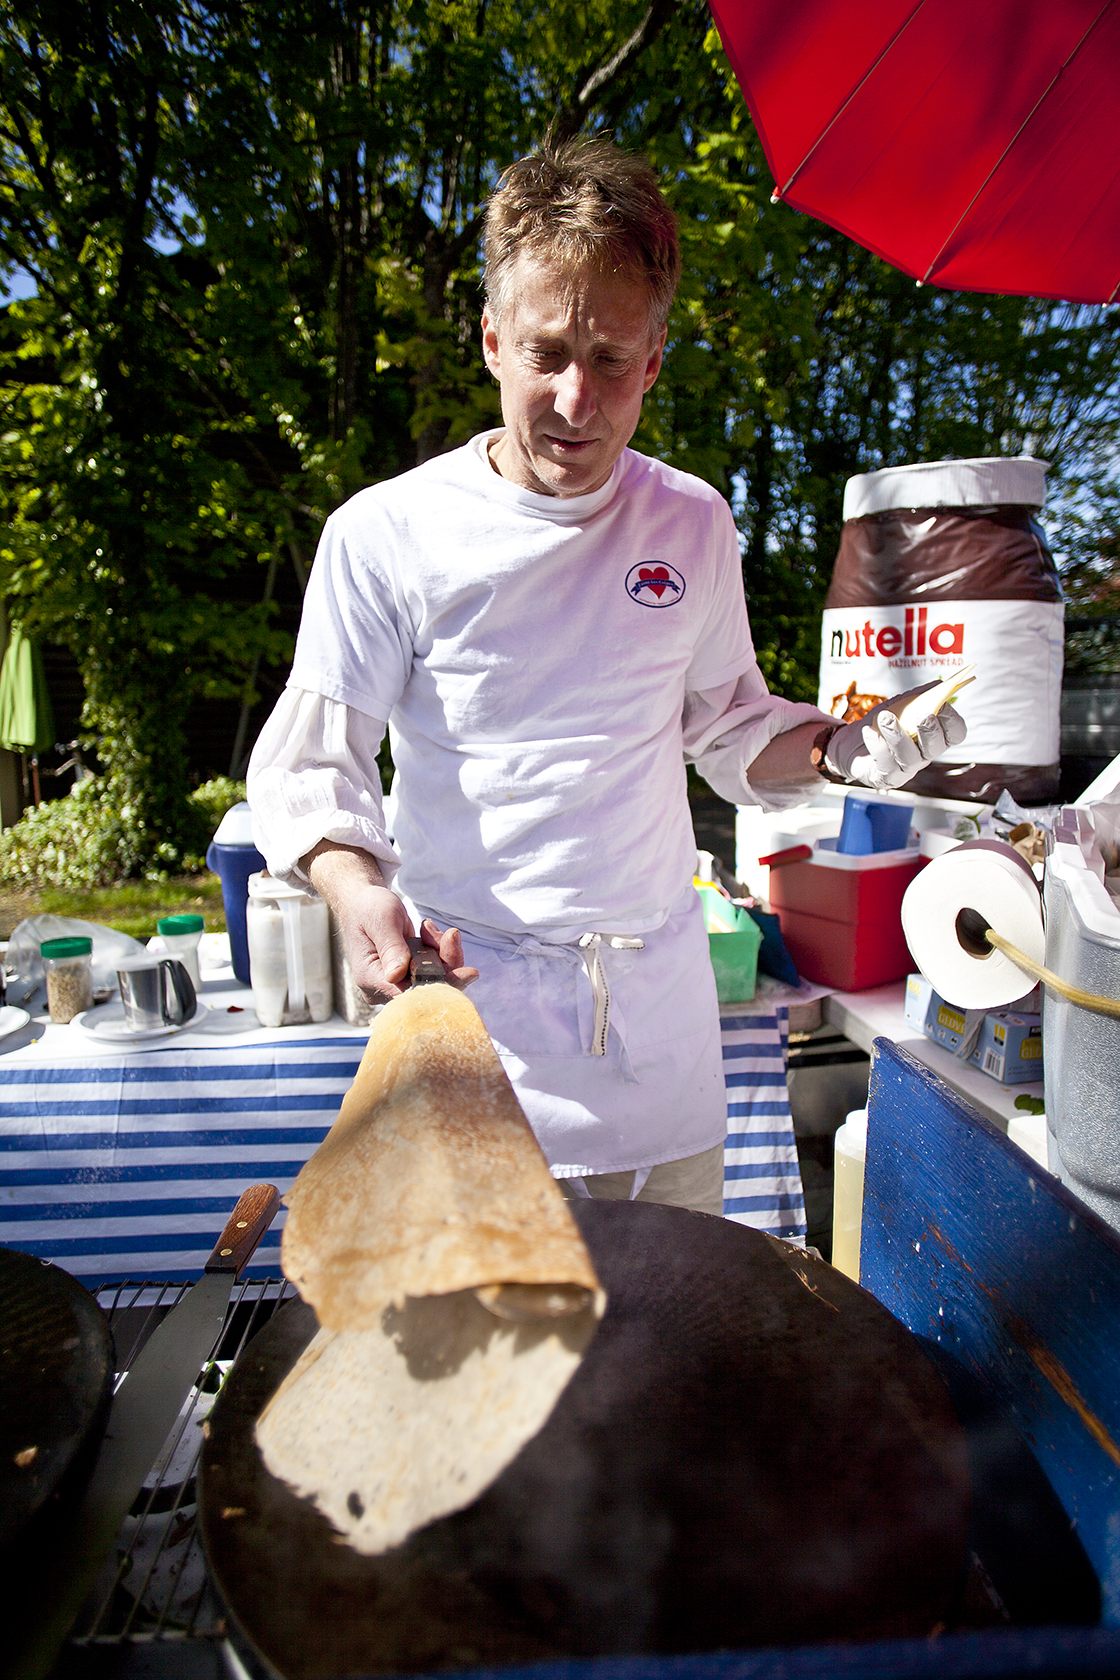  J’aime Les Crepes owner Paul Pluska cooks&nbsp;for visitors to the Bainbridge Island farmers market outside of his new Madrone Lane shop location prior to its grand opening.&nbsp; 